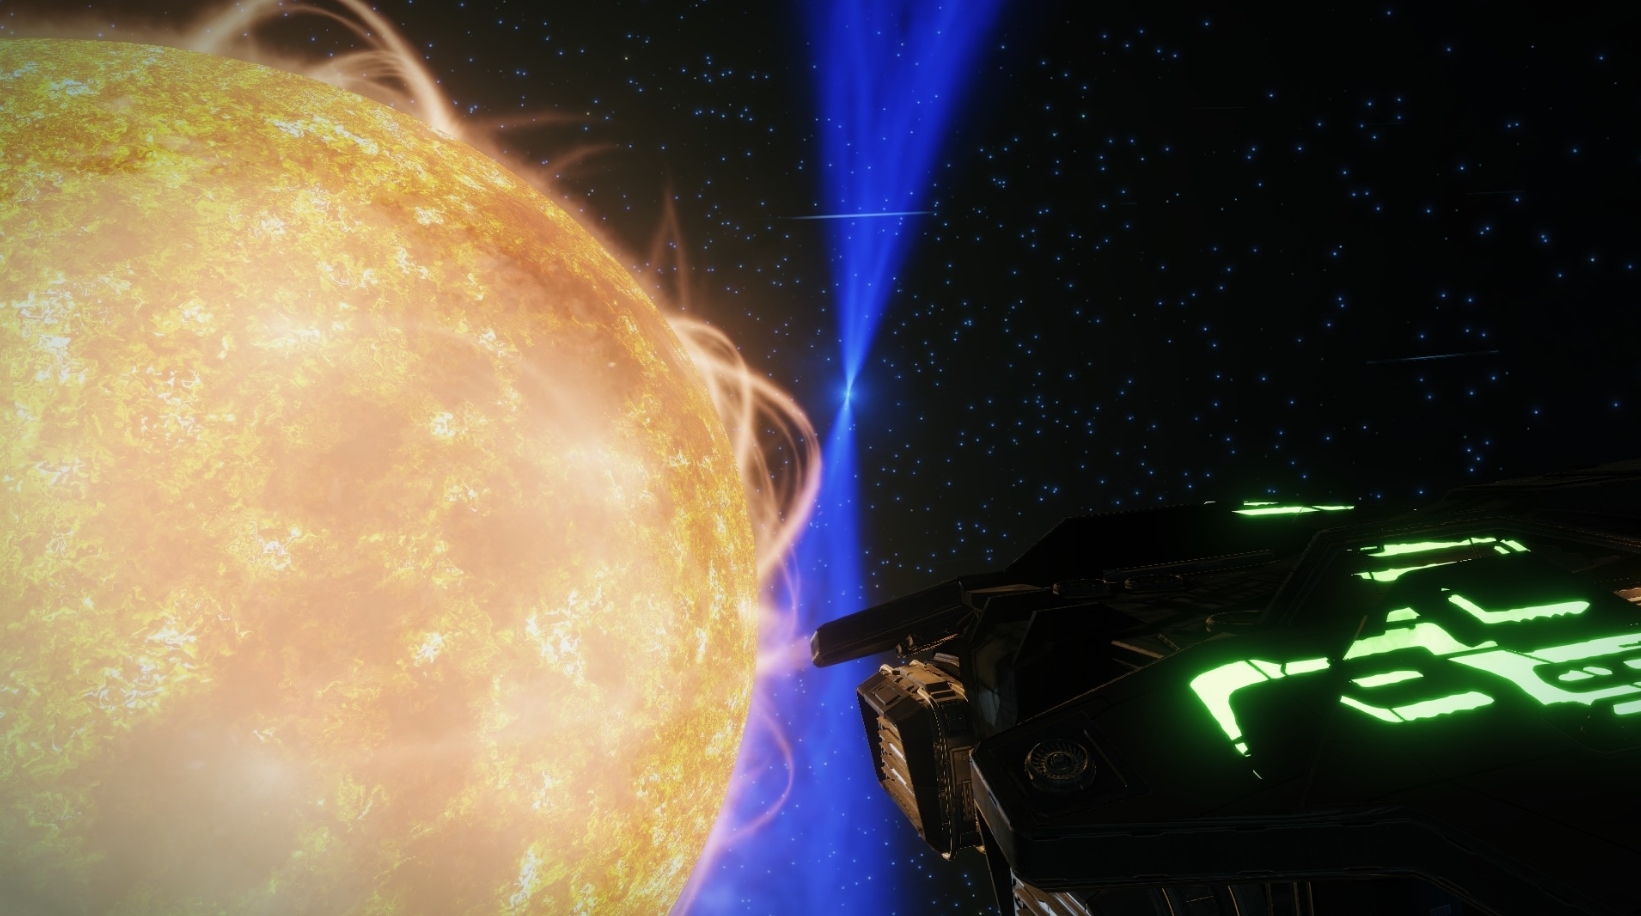 This neutron star is spinning pretty quick!